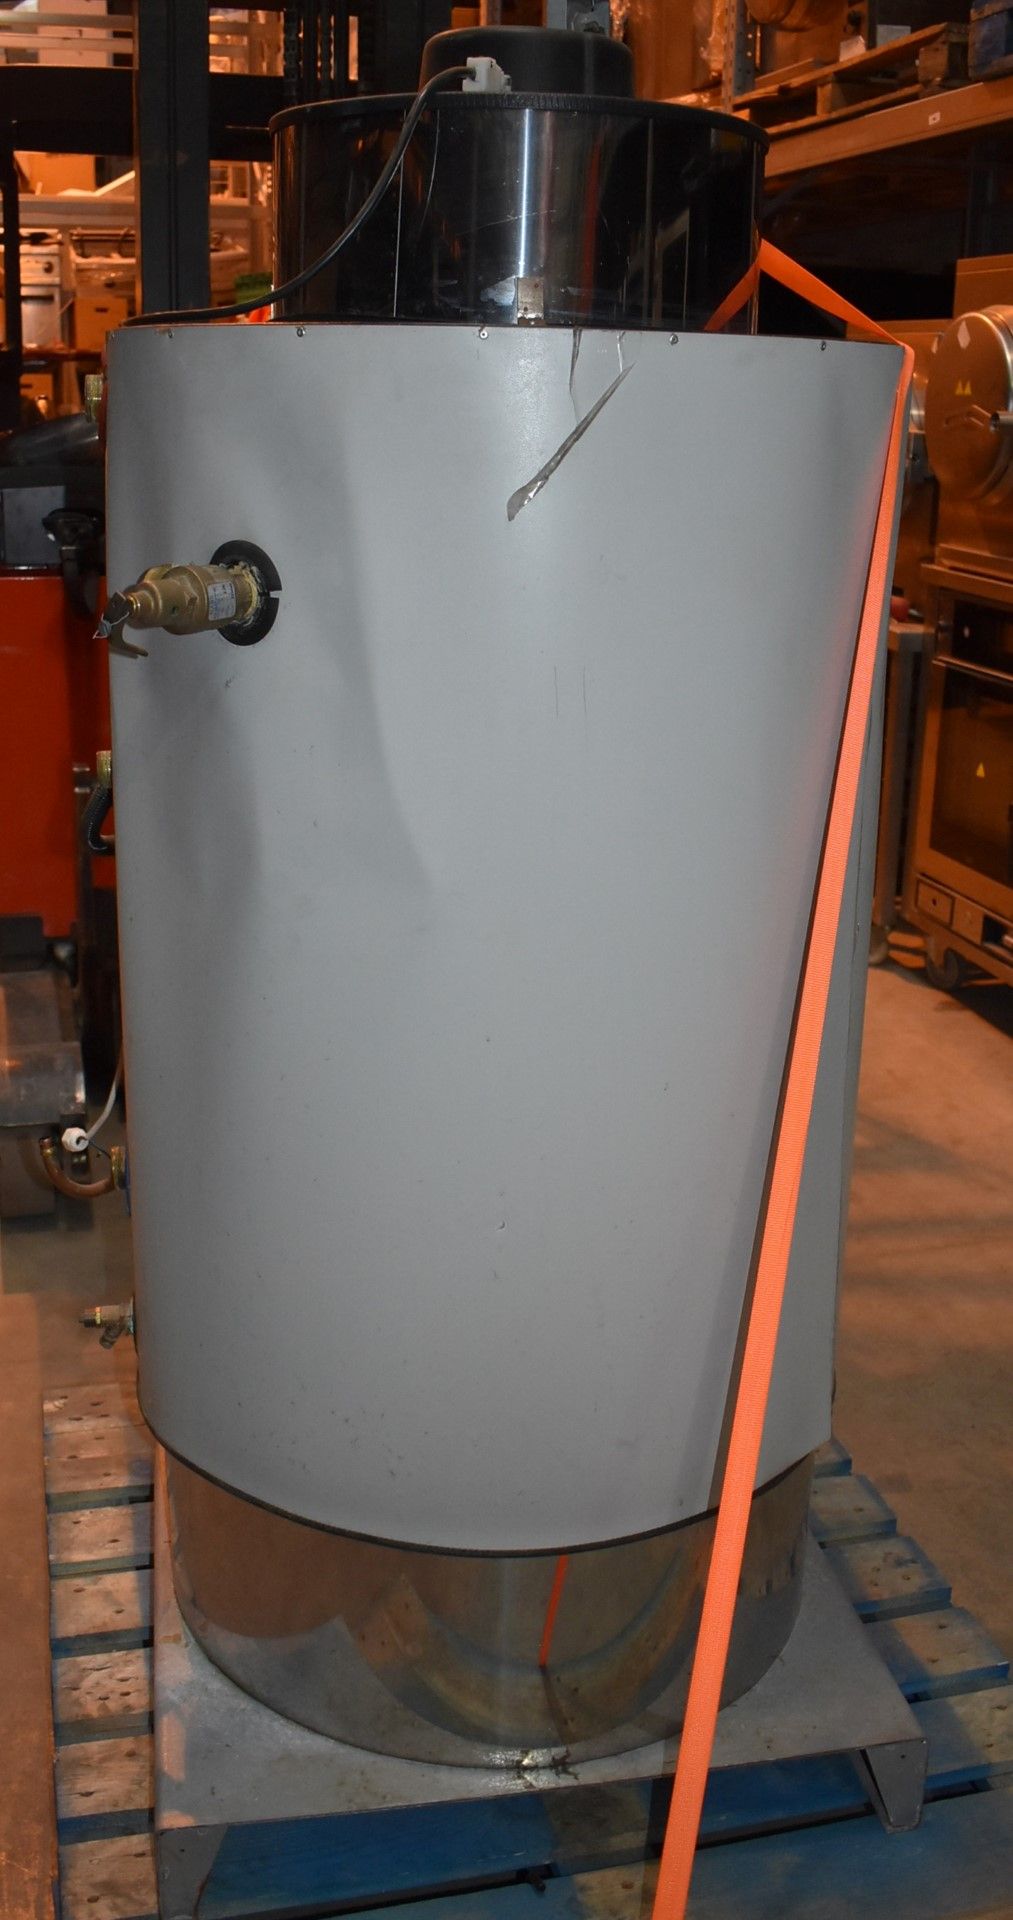 1 x Lochinvar High Efficiency Gas Fired 220L Storage Water Heater - Model LBF-220 - Ref: WH2-145 H5D - Image 8 of 14